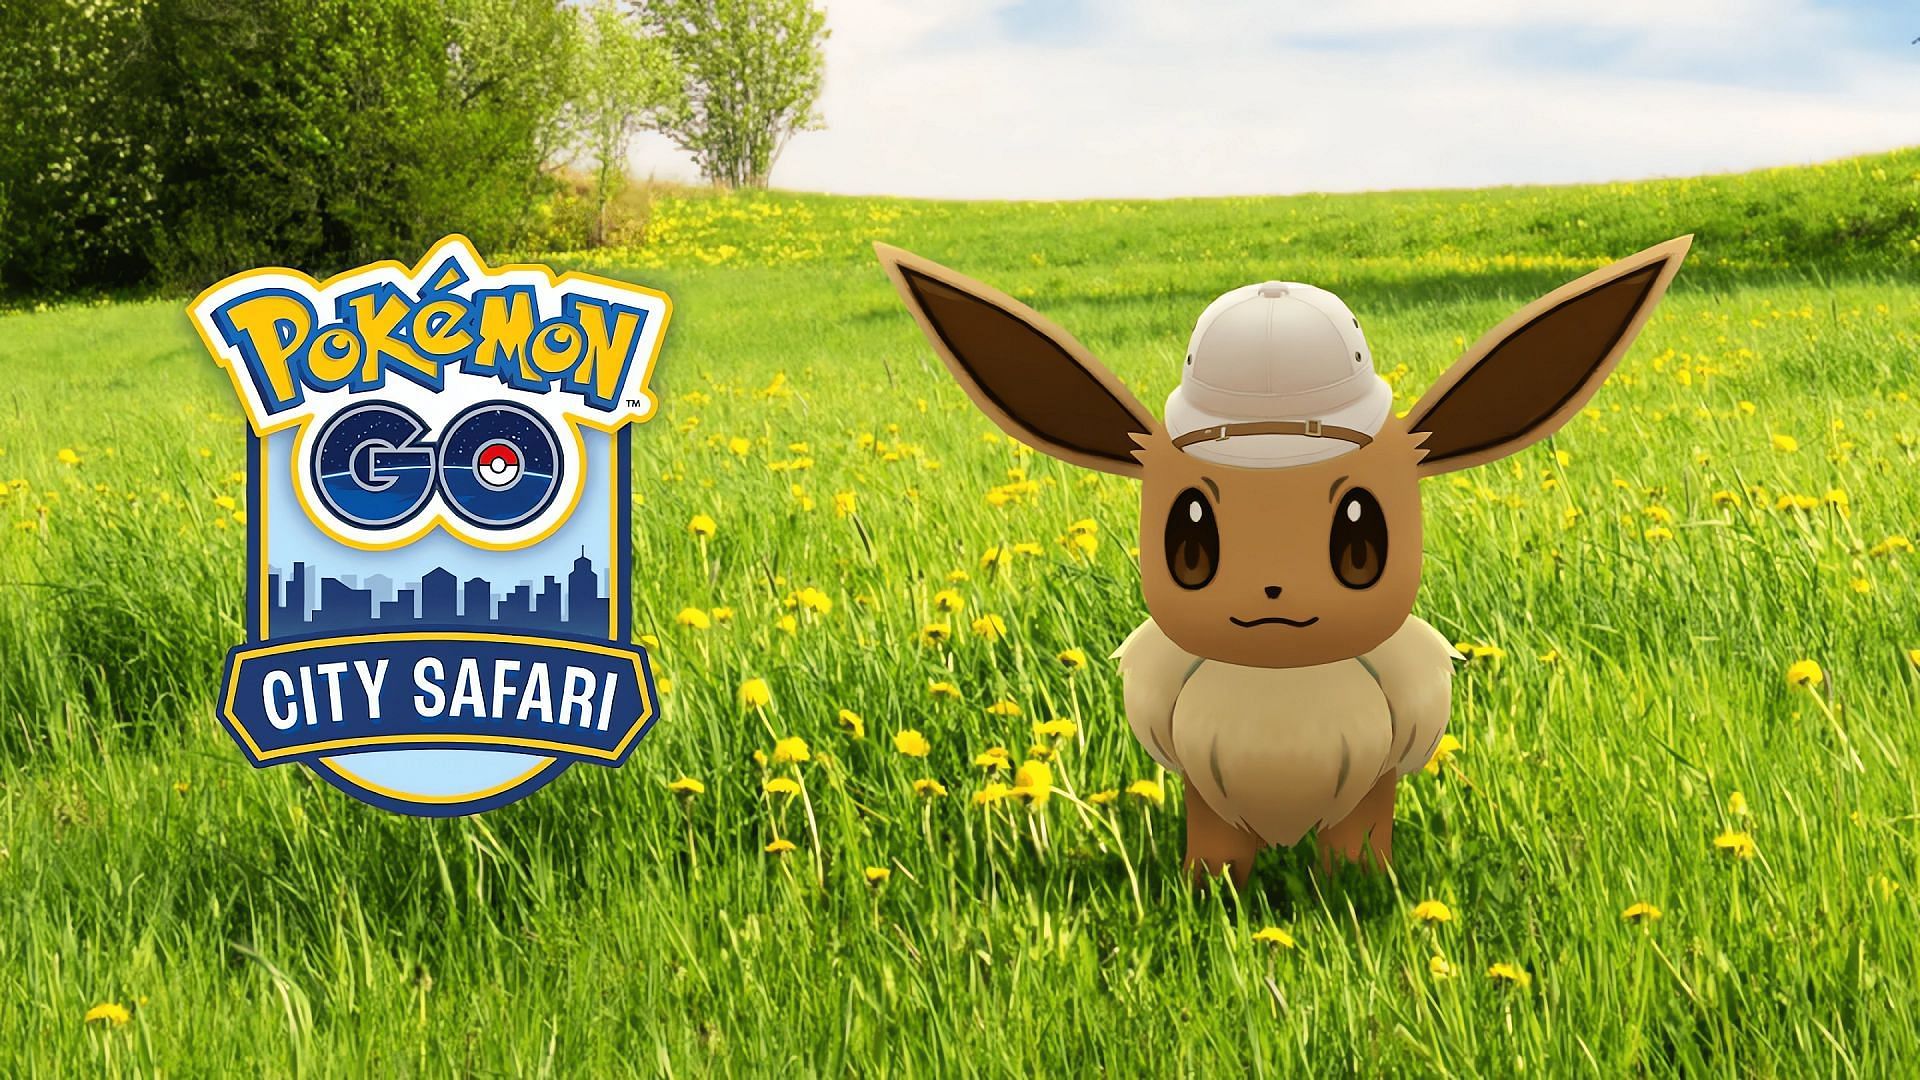 City Safaris are a new Pokemon GO event allowing trainers to explore historic cities across the world.